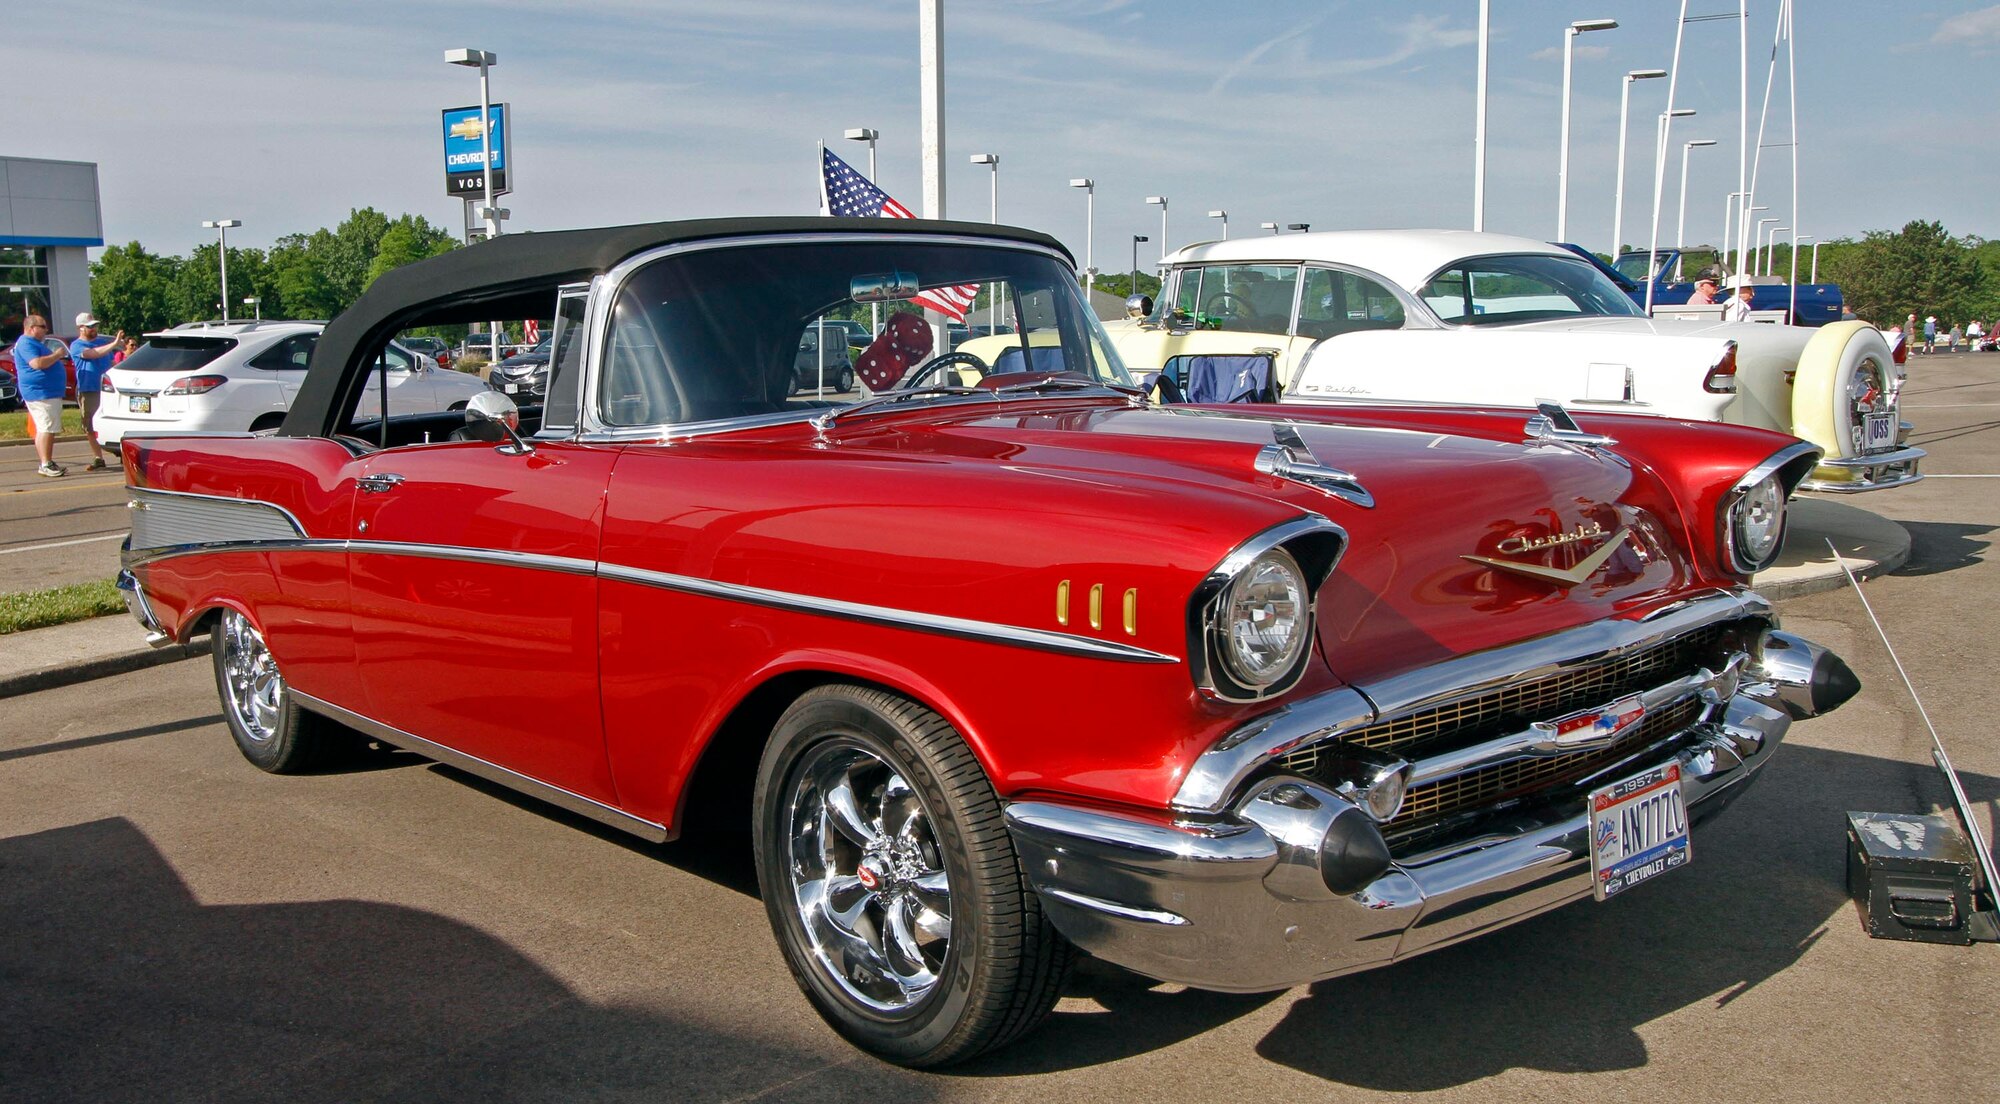 Mike Karns has owned this 1957 Chevrolet convertible since 1970 and restored it in 2008. (Cox Media Group photos/Skip Peterson)